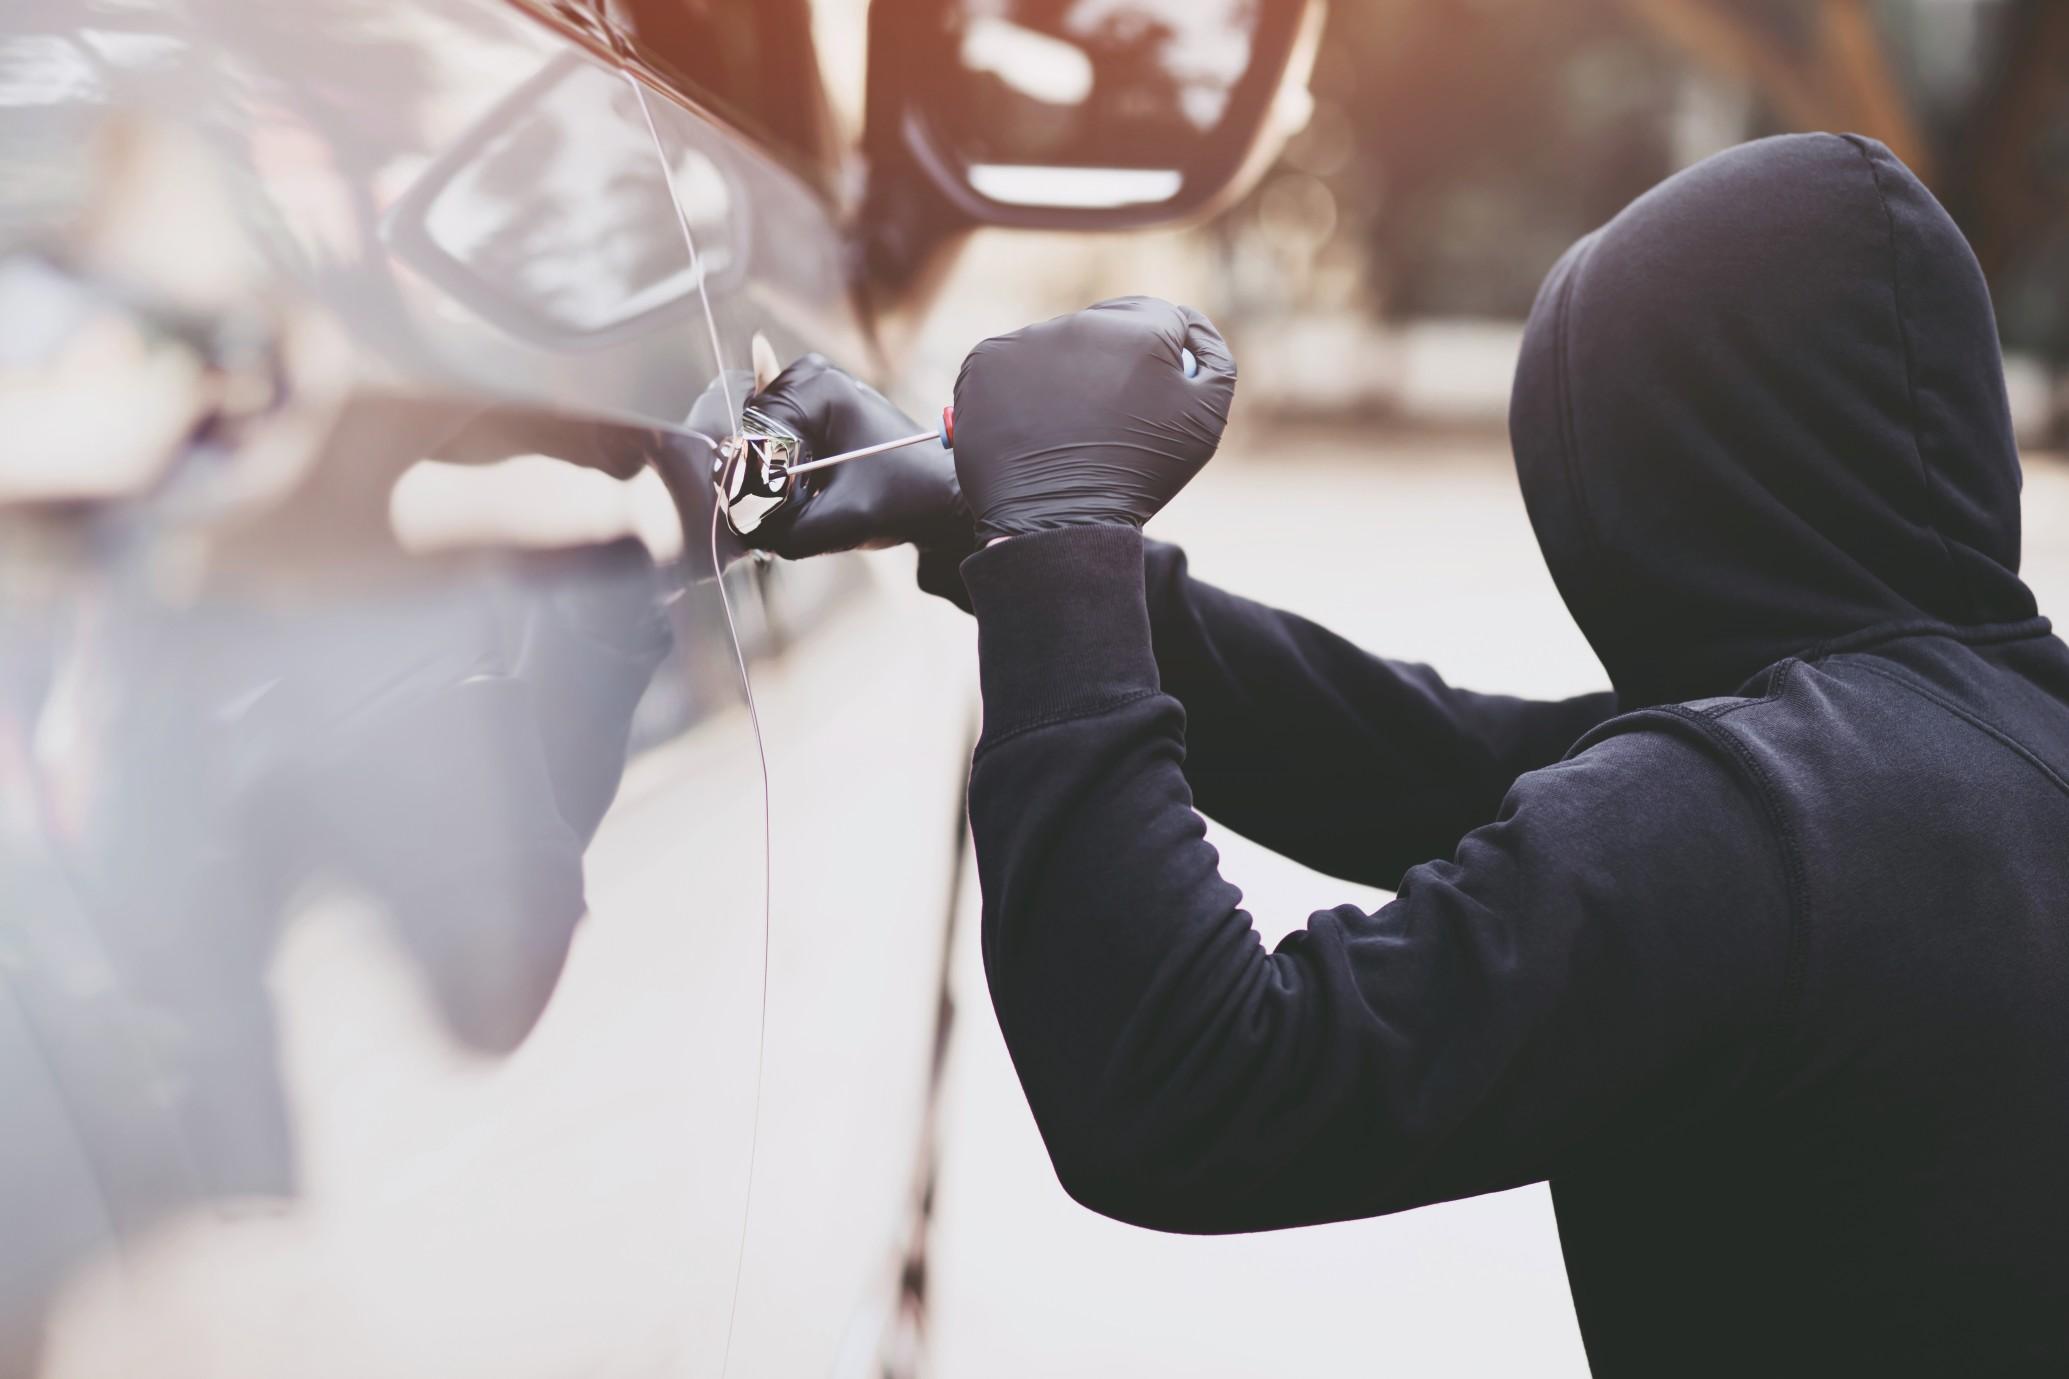 Getting your car stolen is a frustrating experience | Twenty20